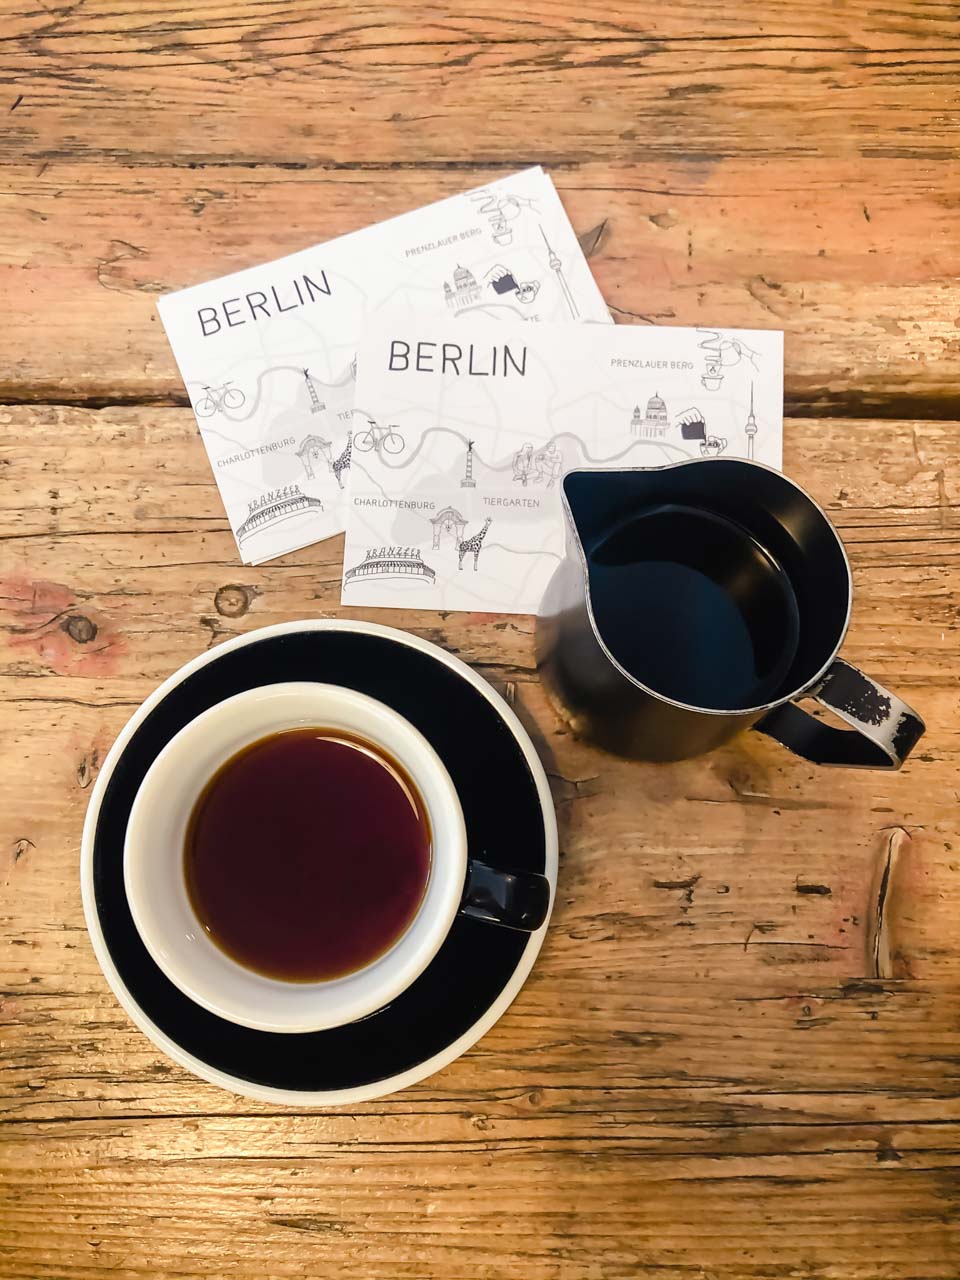 Cup of coffee and a pitcher on a table next to two Berlin postcards inside The Barn Coffee Roasters